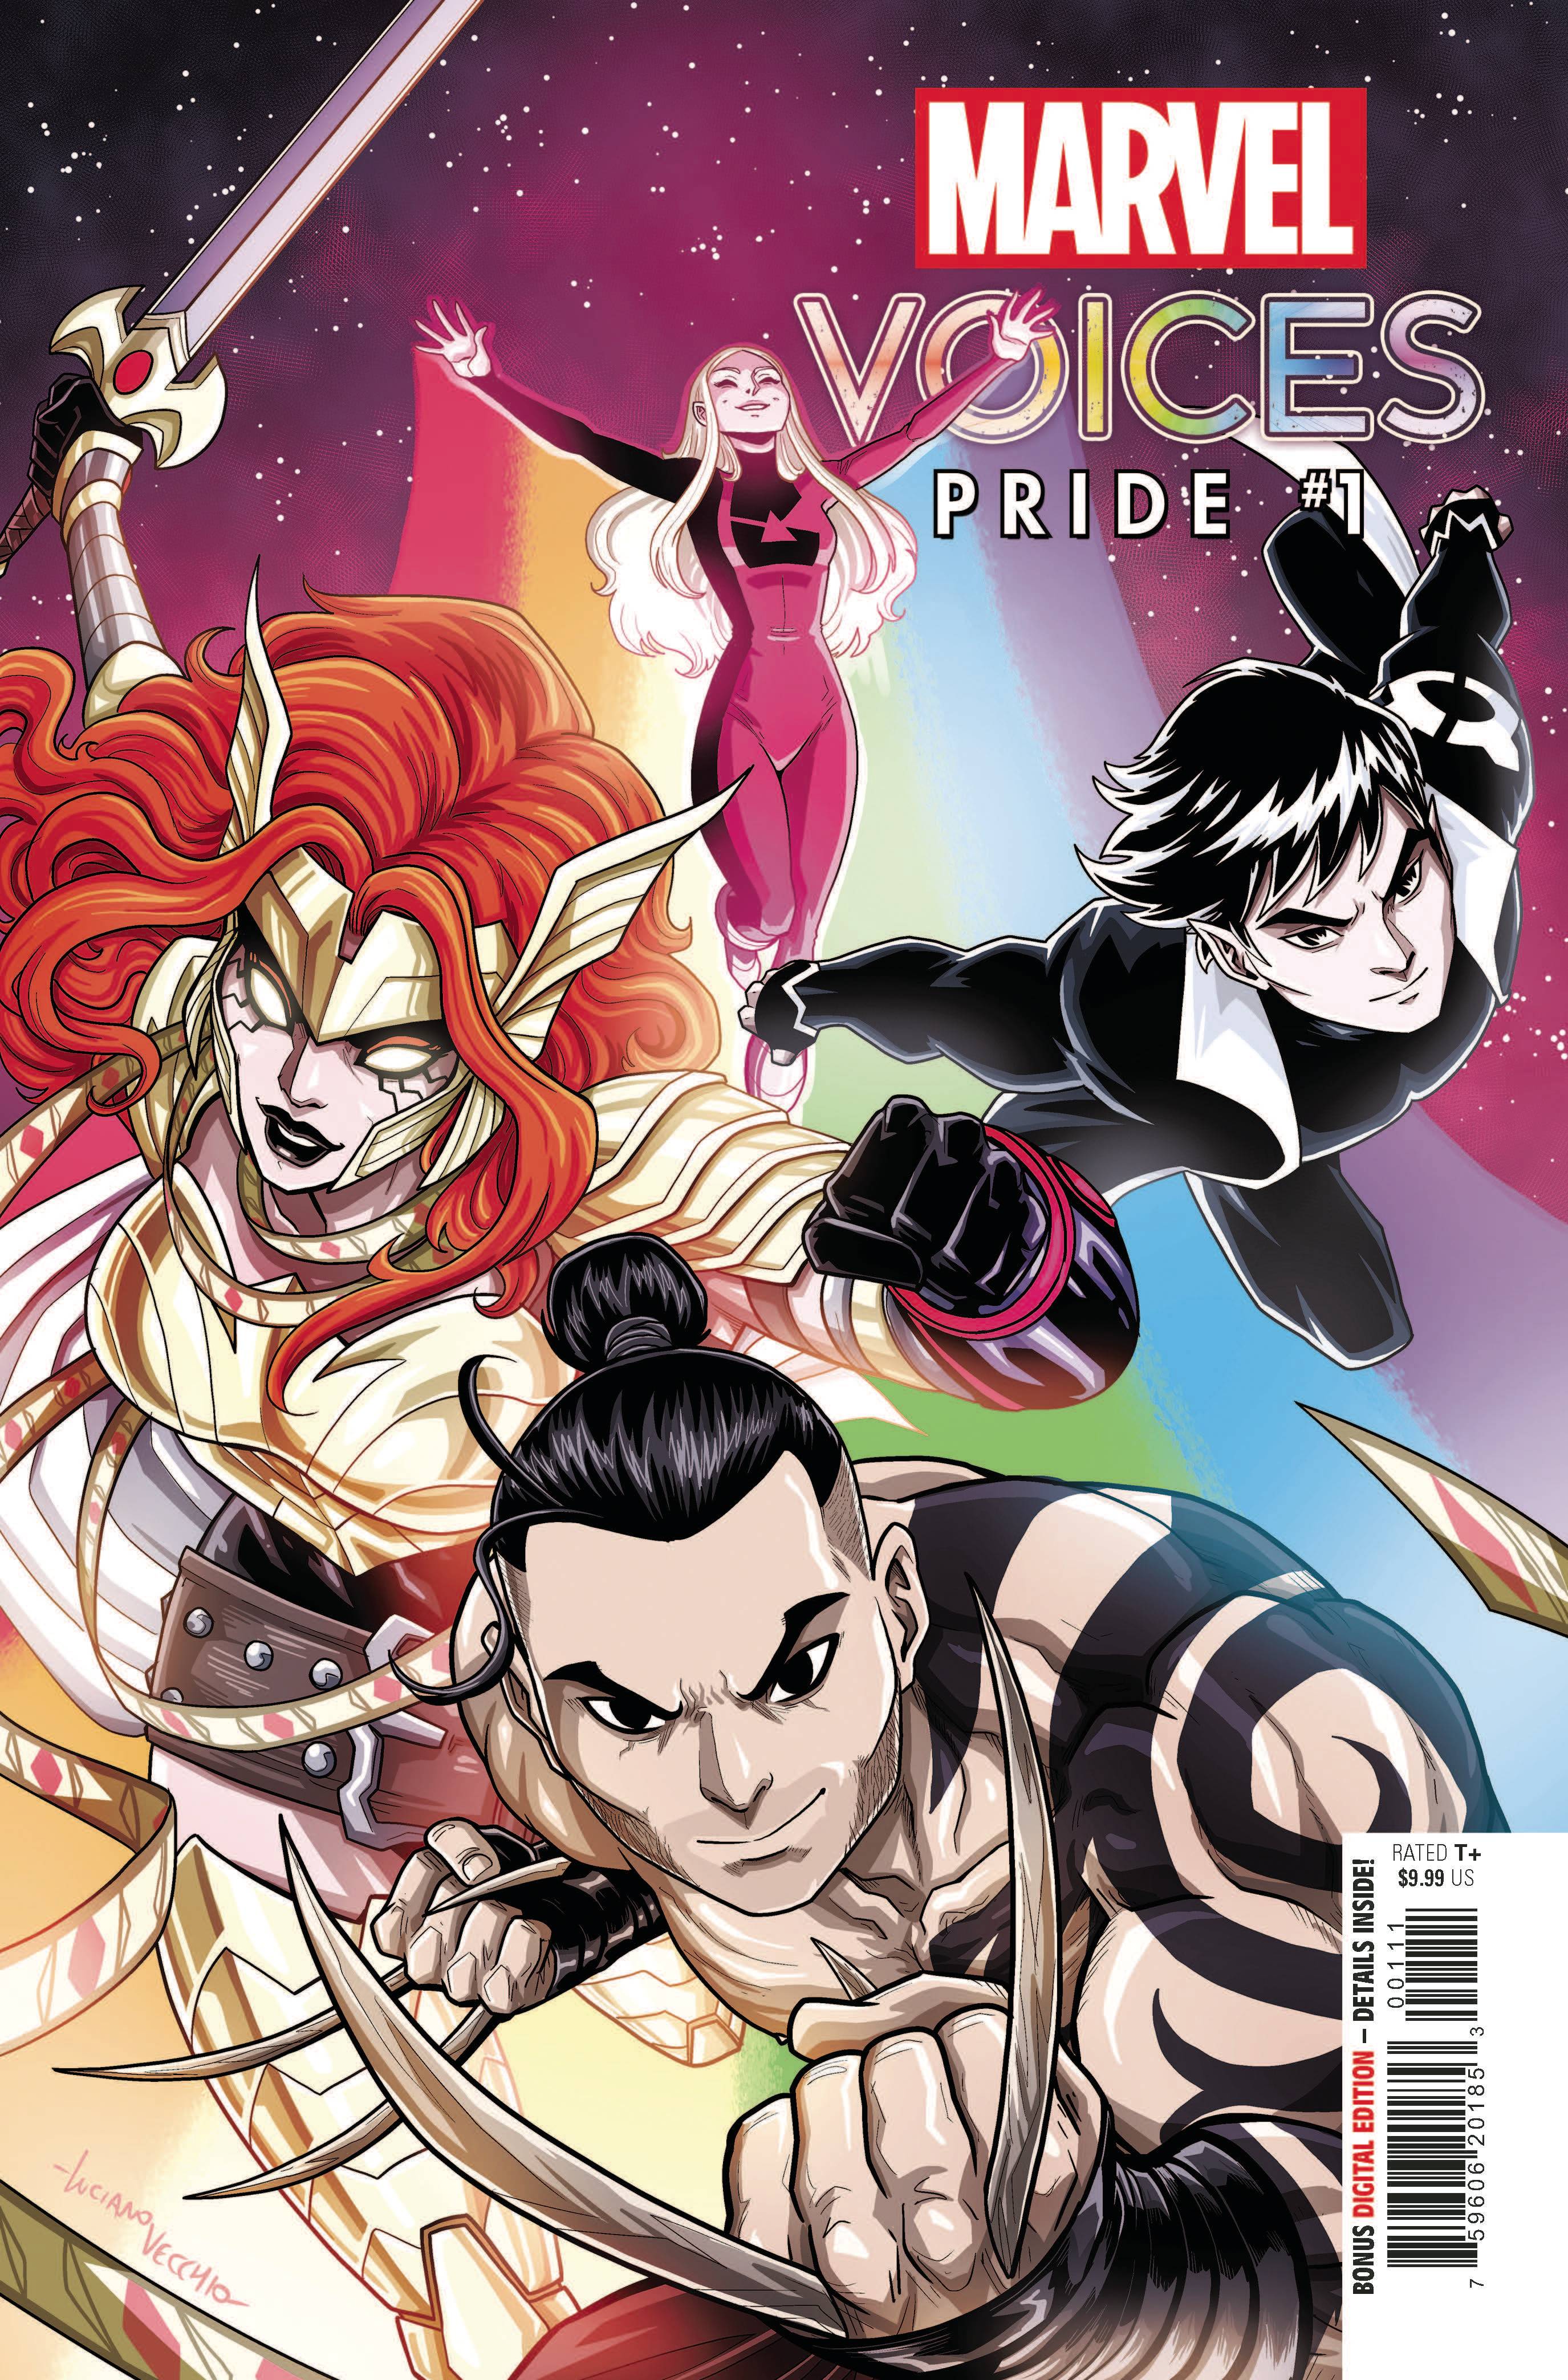 MARVELS VOICES PRIDE #1 | Game Master's Emporium (The New GME)